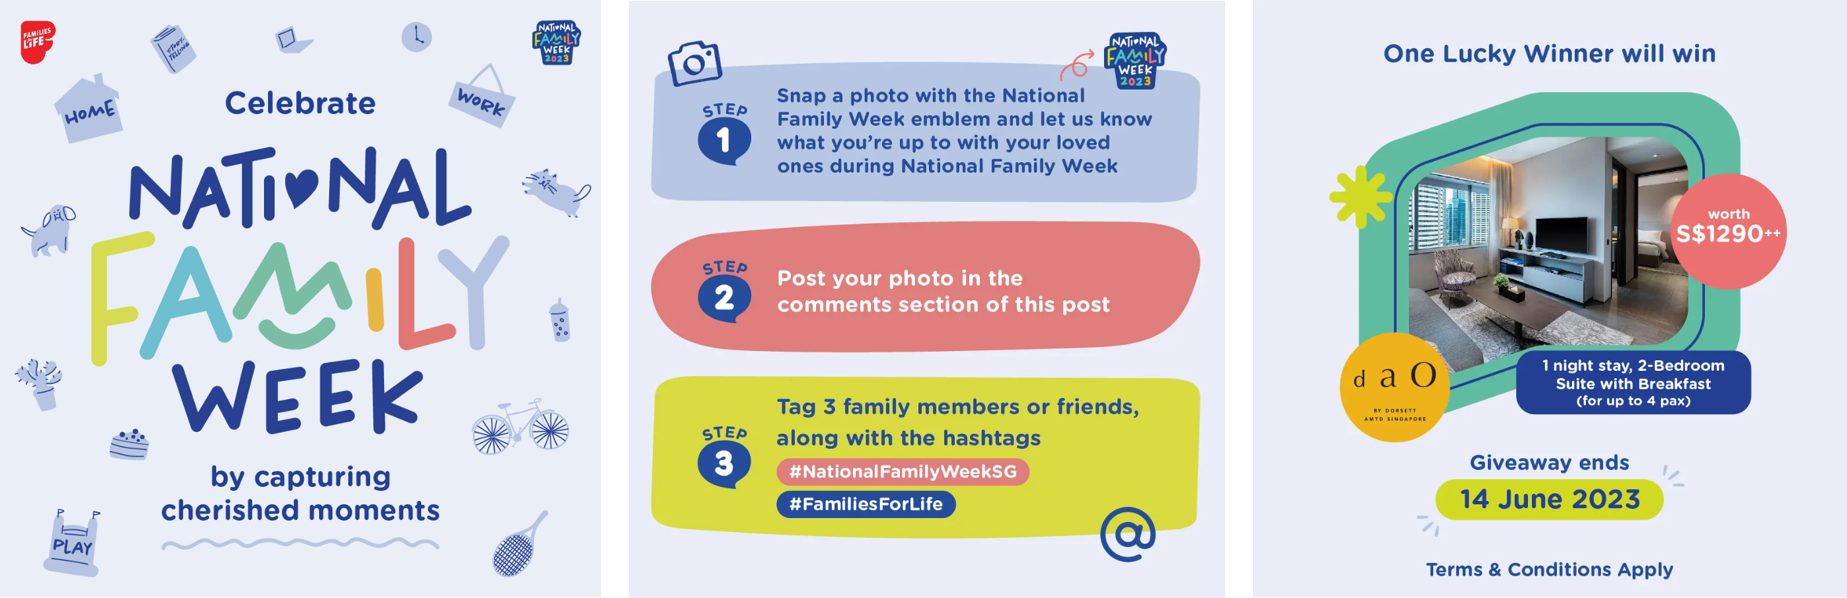 National Family Week Facebook Contest